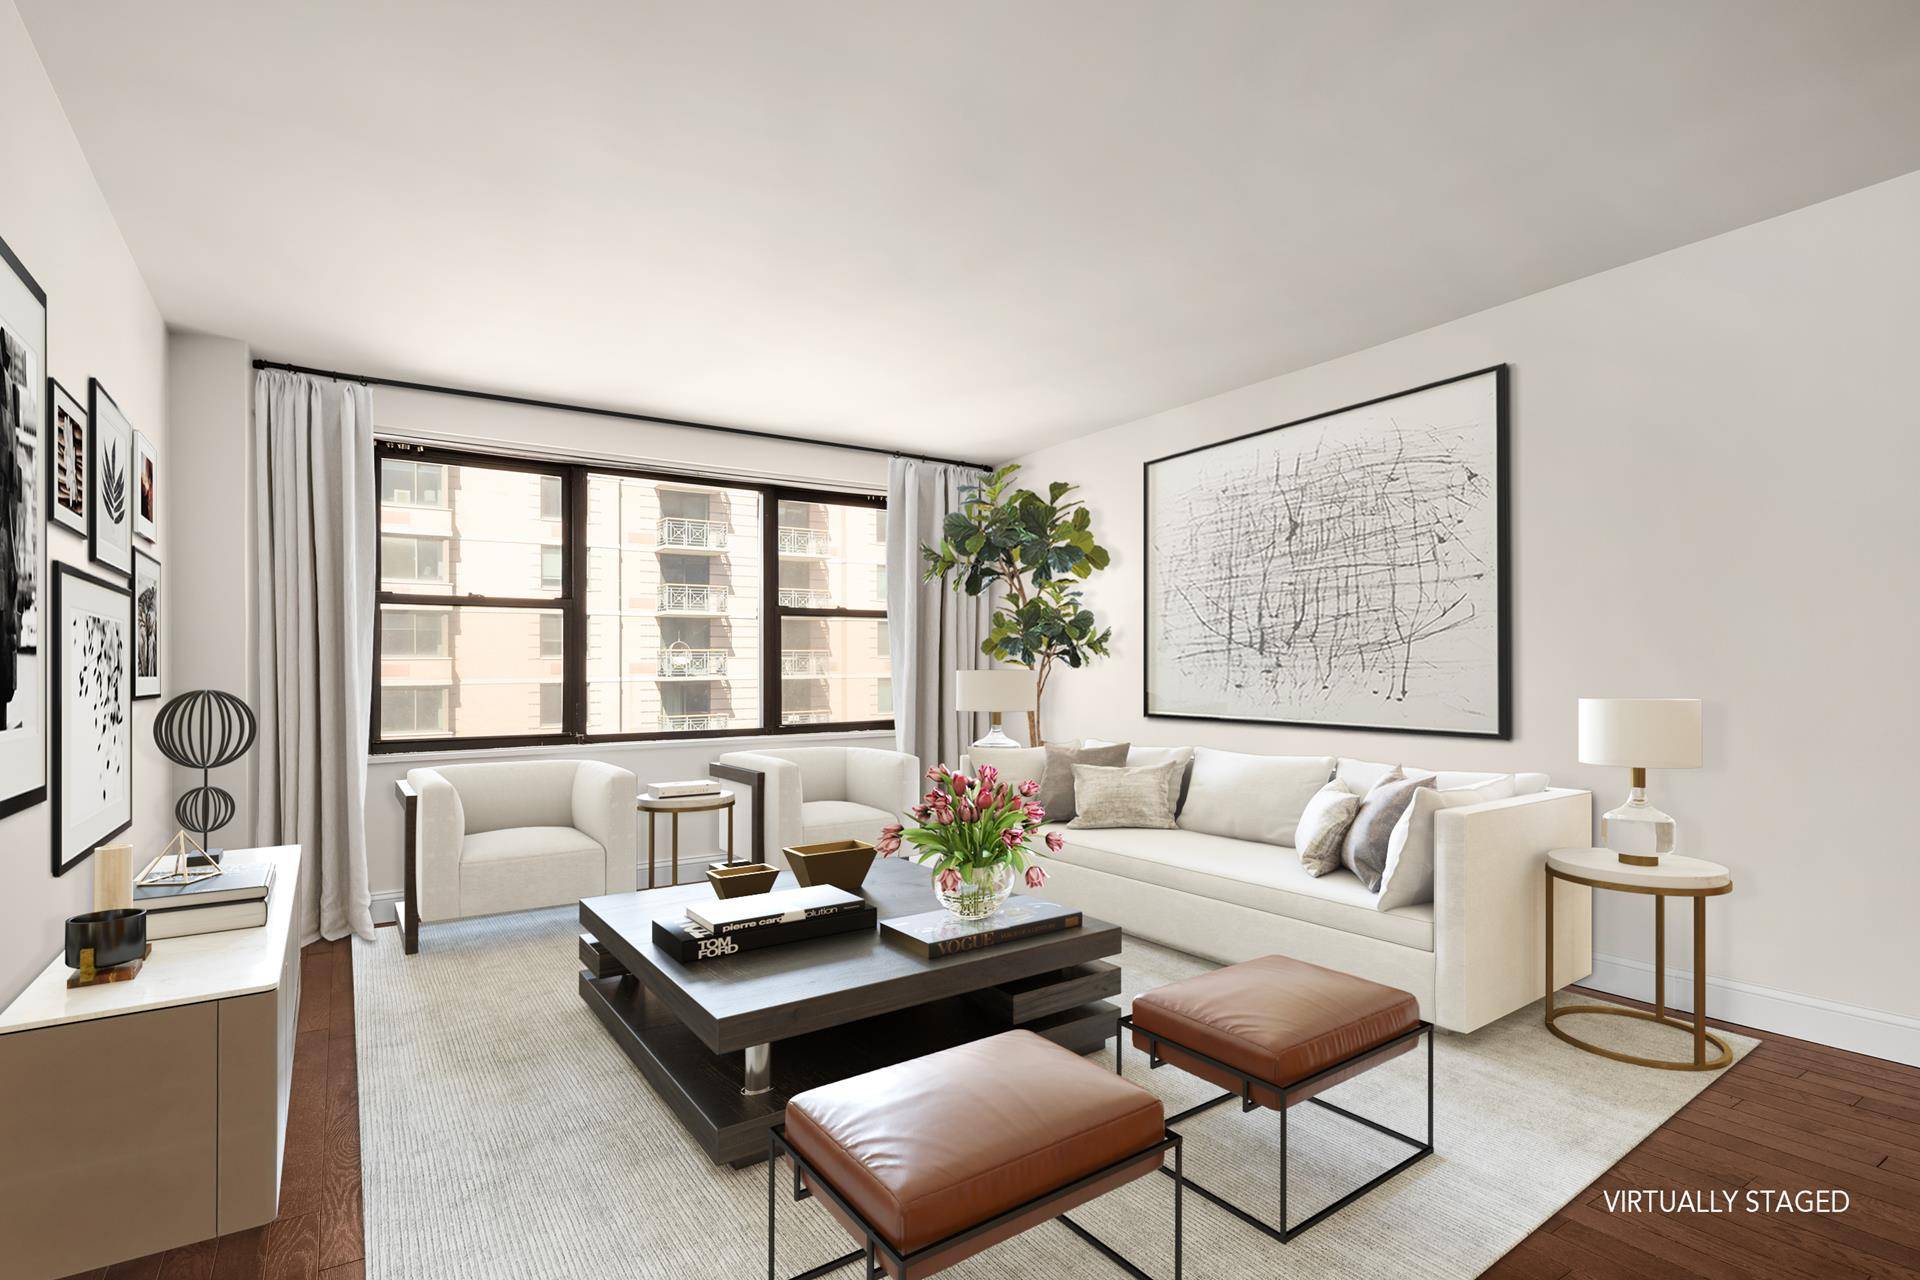 As you relax at night reading a book or watching a game, you will enjoy views of the Empire State Building from your living room and bedroom in this spacious ...